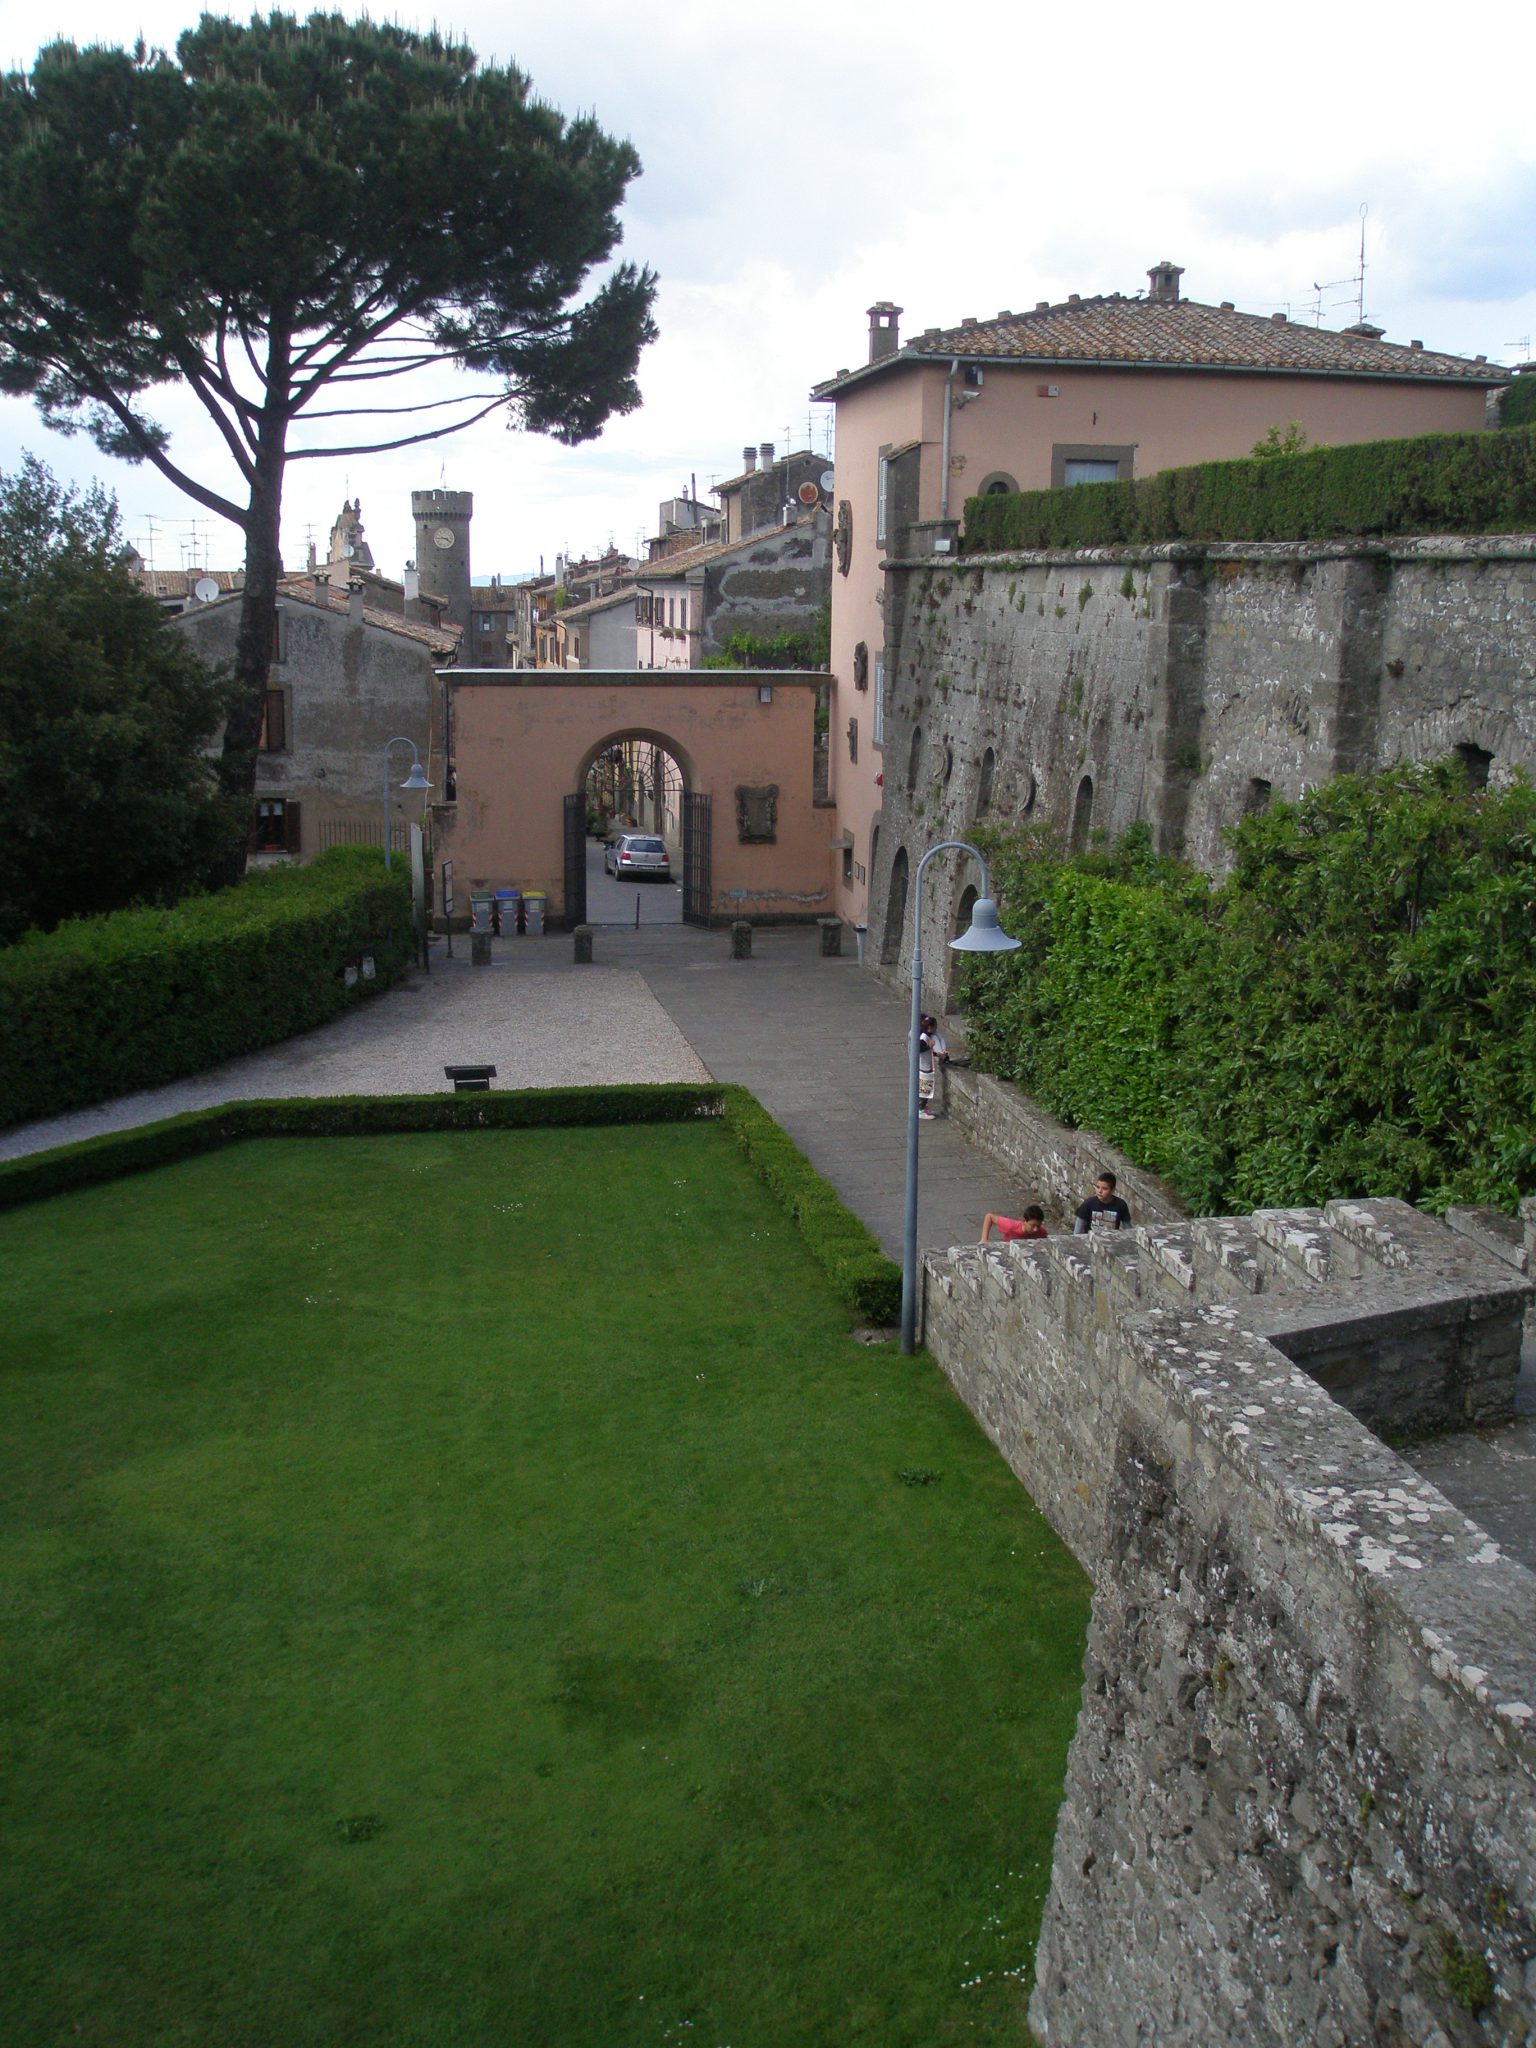 View from the Steps, back toward the Entry Gate, and then to the Village of Bagnaia.